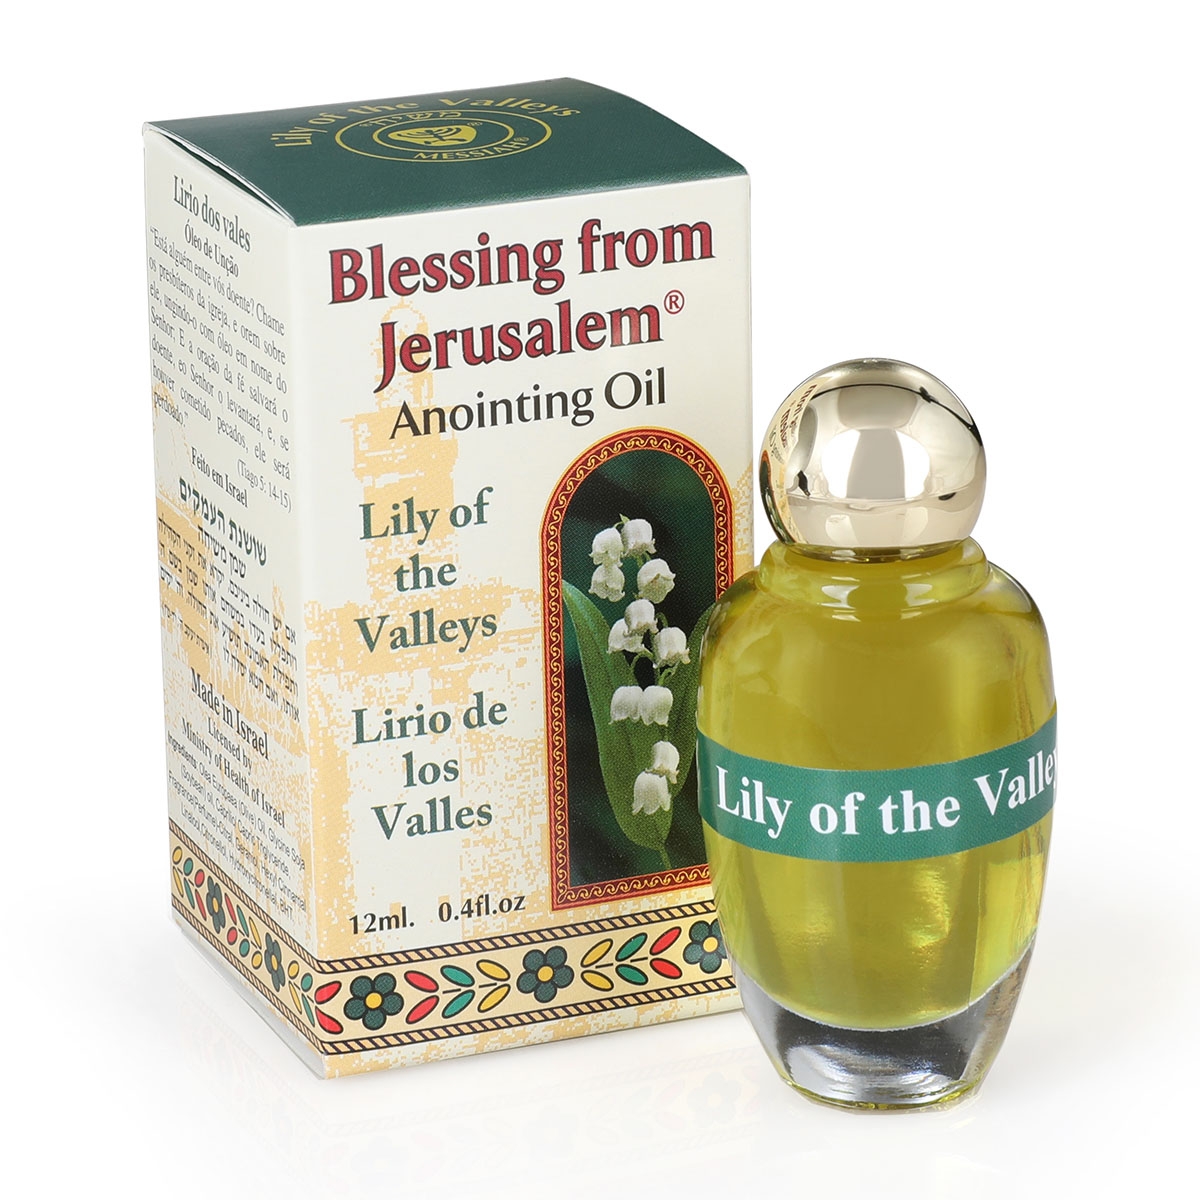 What The Bible Says About Prayer Cloths And Anointing Oil?